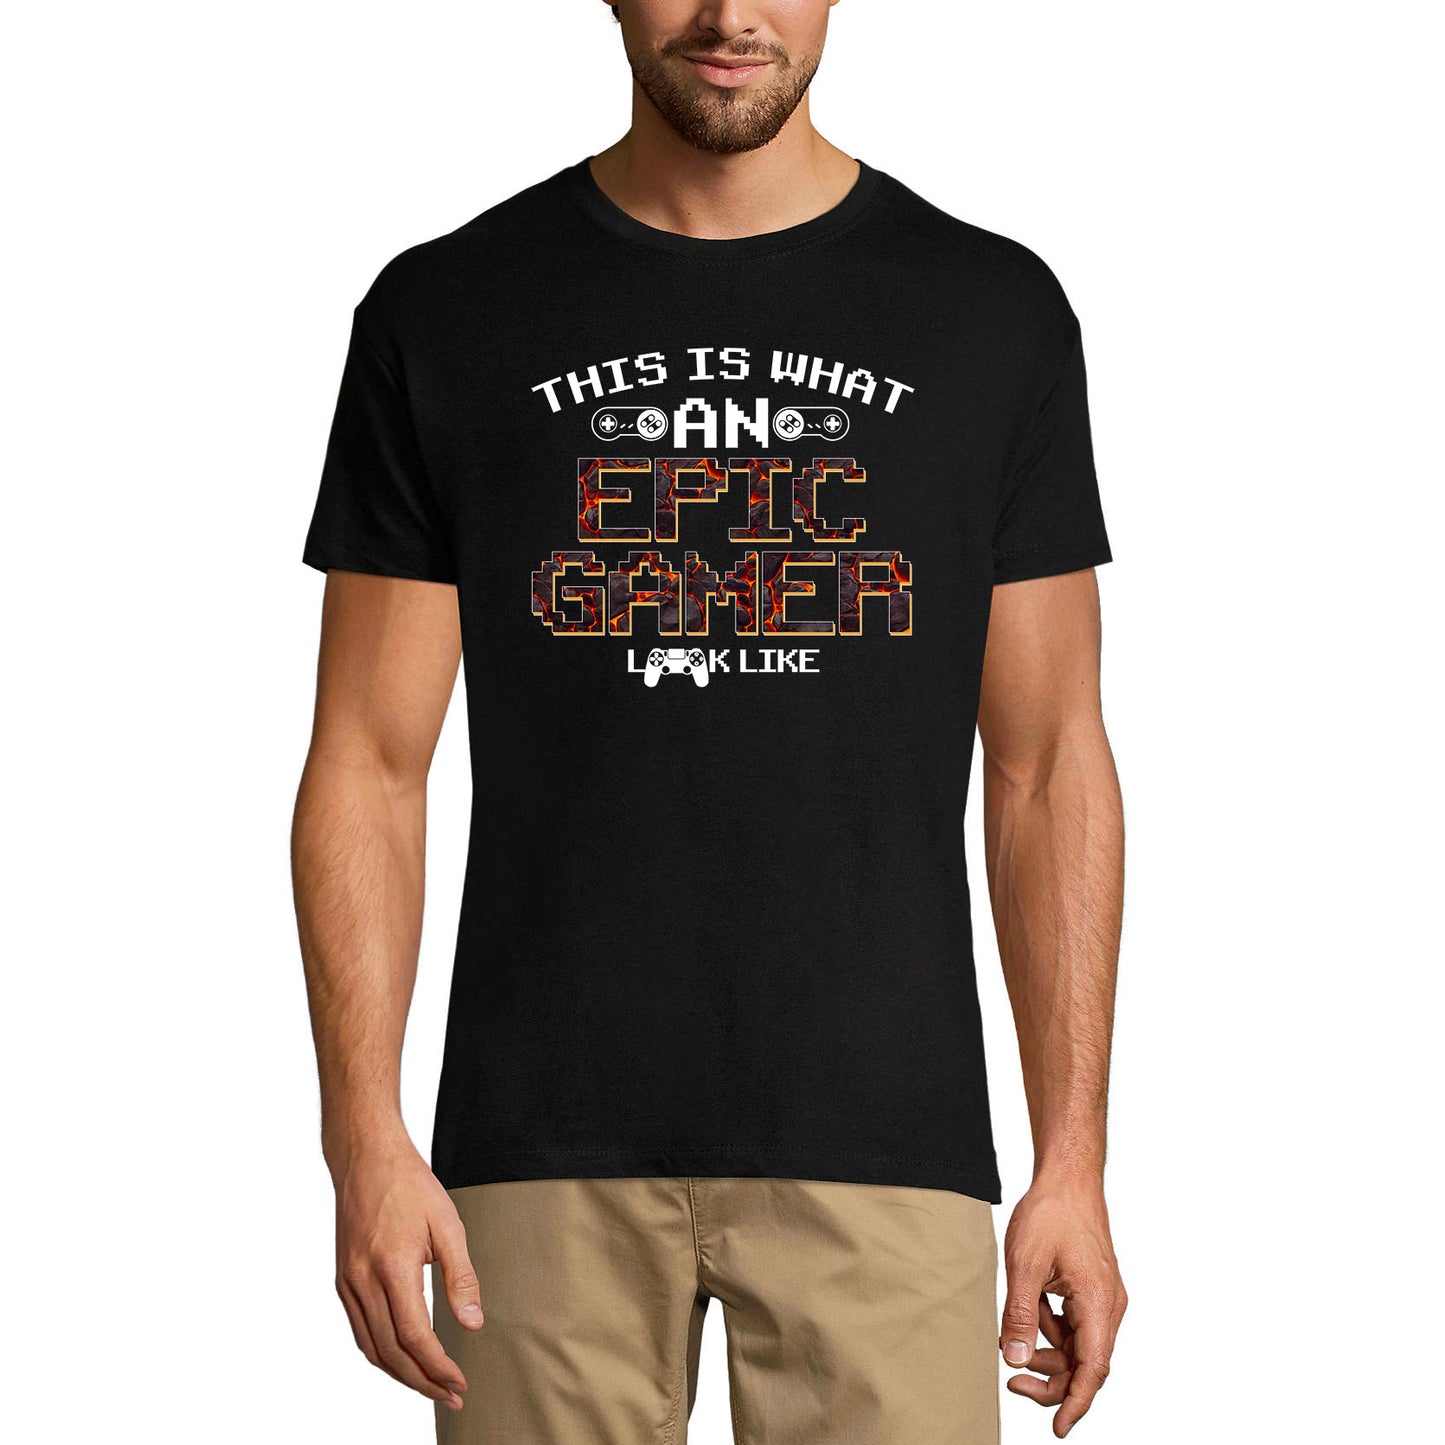 ULTRABASIC Men's T-Shirt This Is What an Epic Gamer Look Like - Gaming Apparel